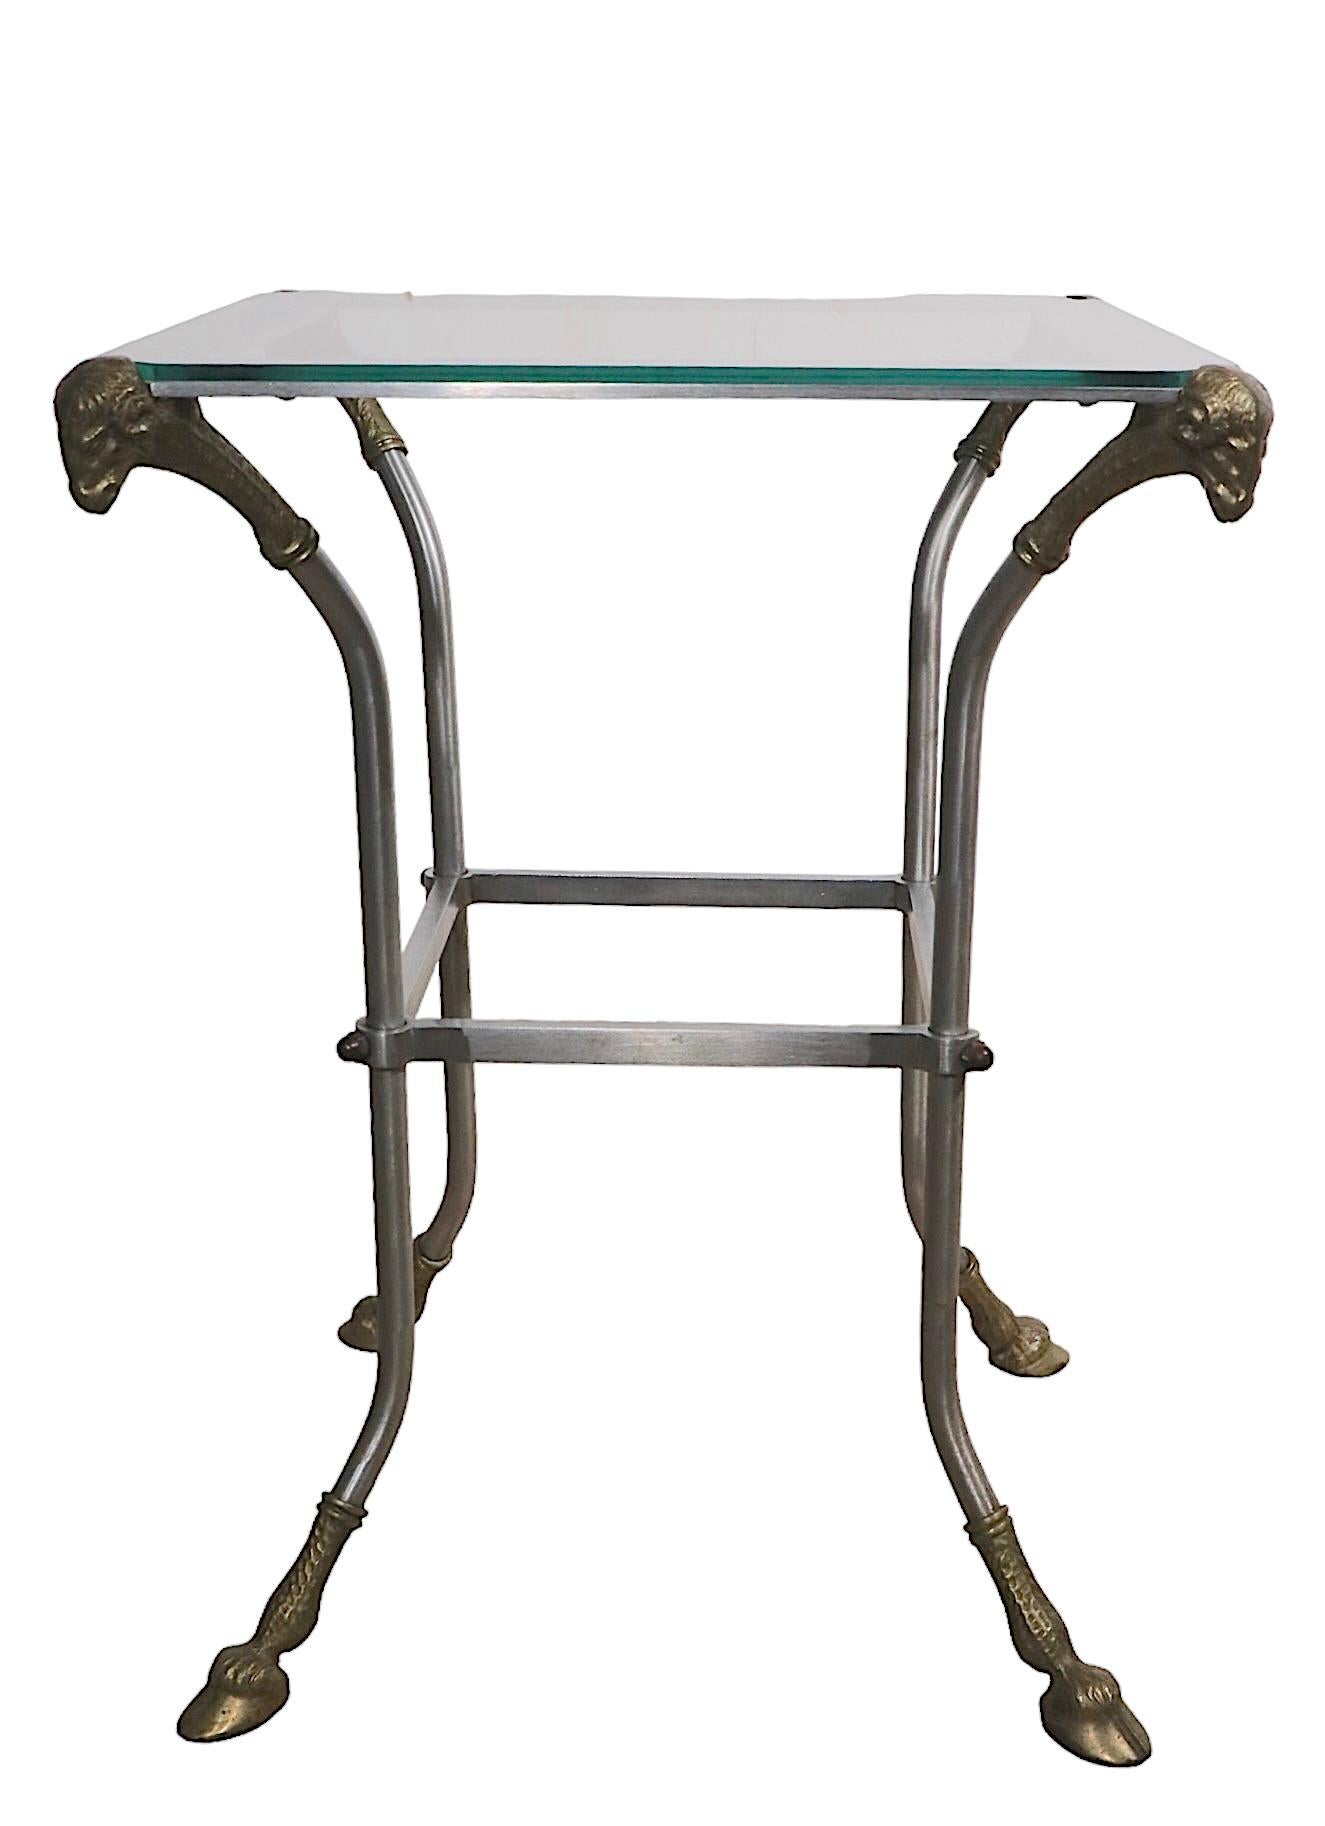 Steel Brass and Glass Neo Classic Table Att. to Maison Jansen For Sale 11